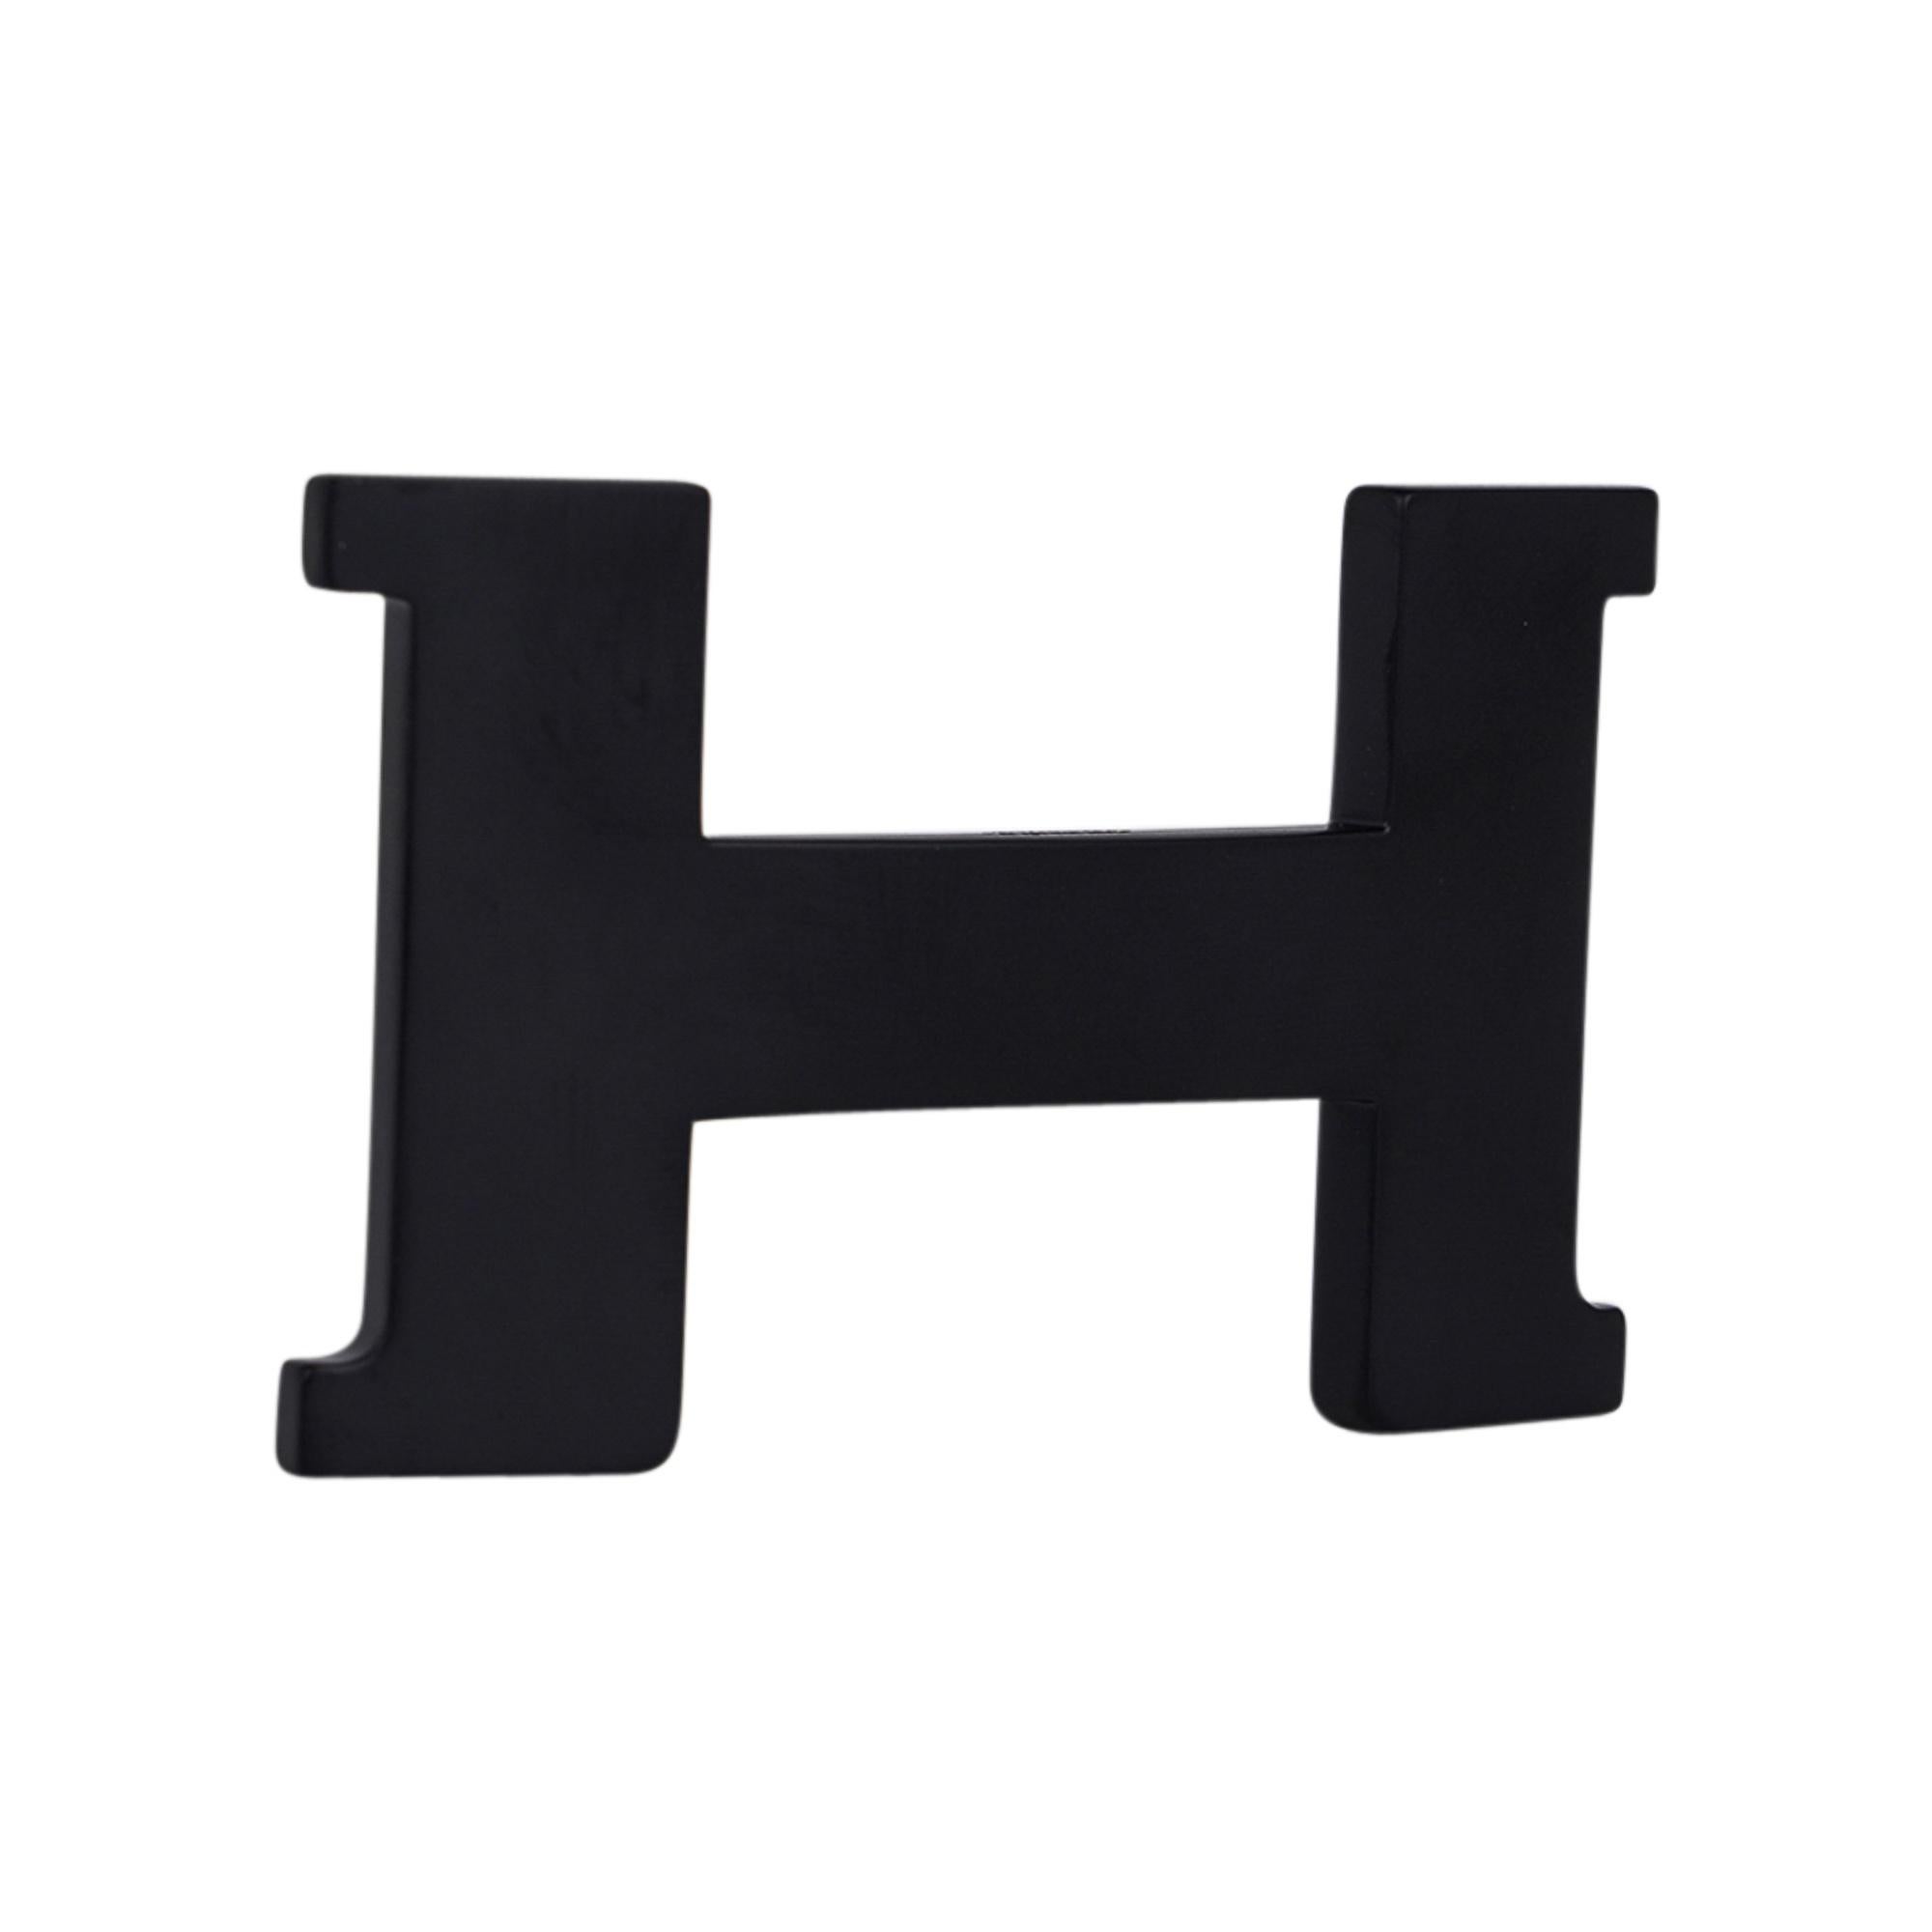 Mightychic offers an Hermes coveted reversible 38 mm So Black Constance H belt.
Reverses from Black Box to Black Togo.
Beautiful with So Black buckle.
The So Black is a rare combination!
Signature HERMES PARIS MADE IN FRANCE is stamped on the